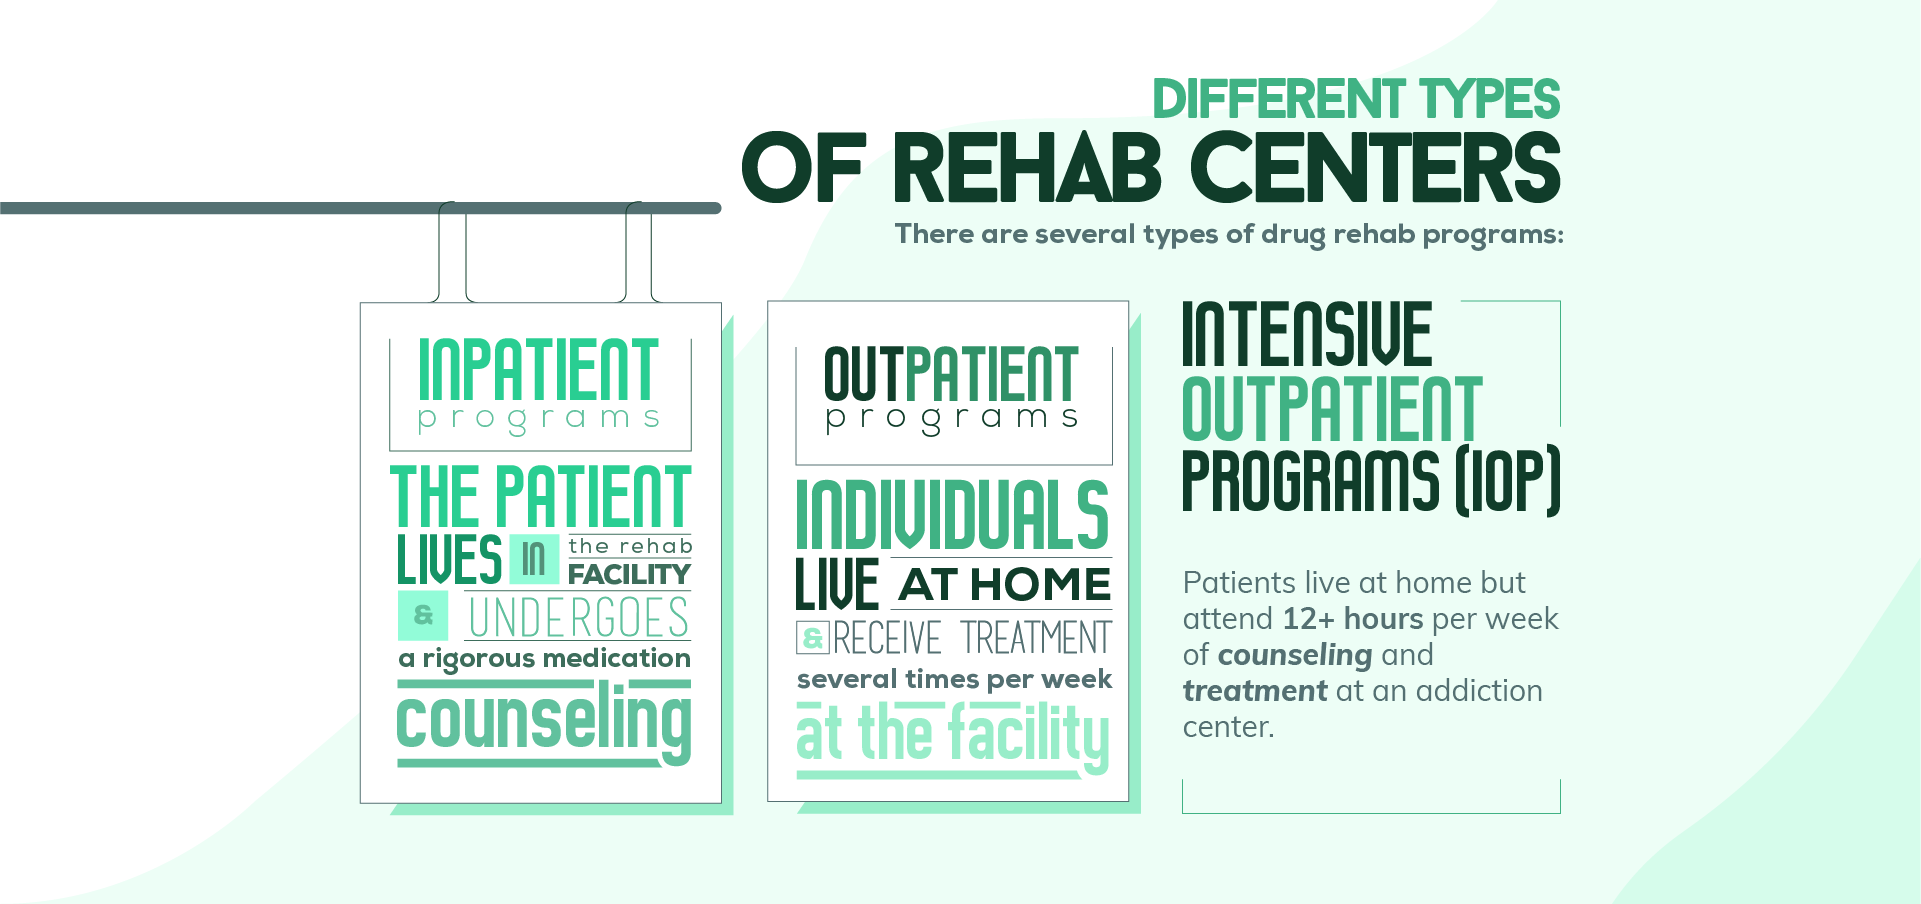 Types of Rehab Centers